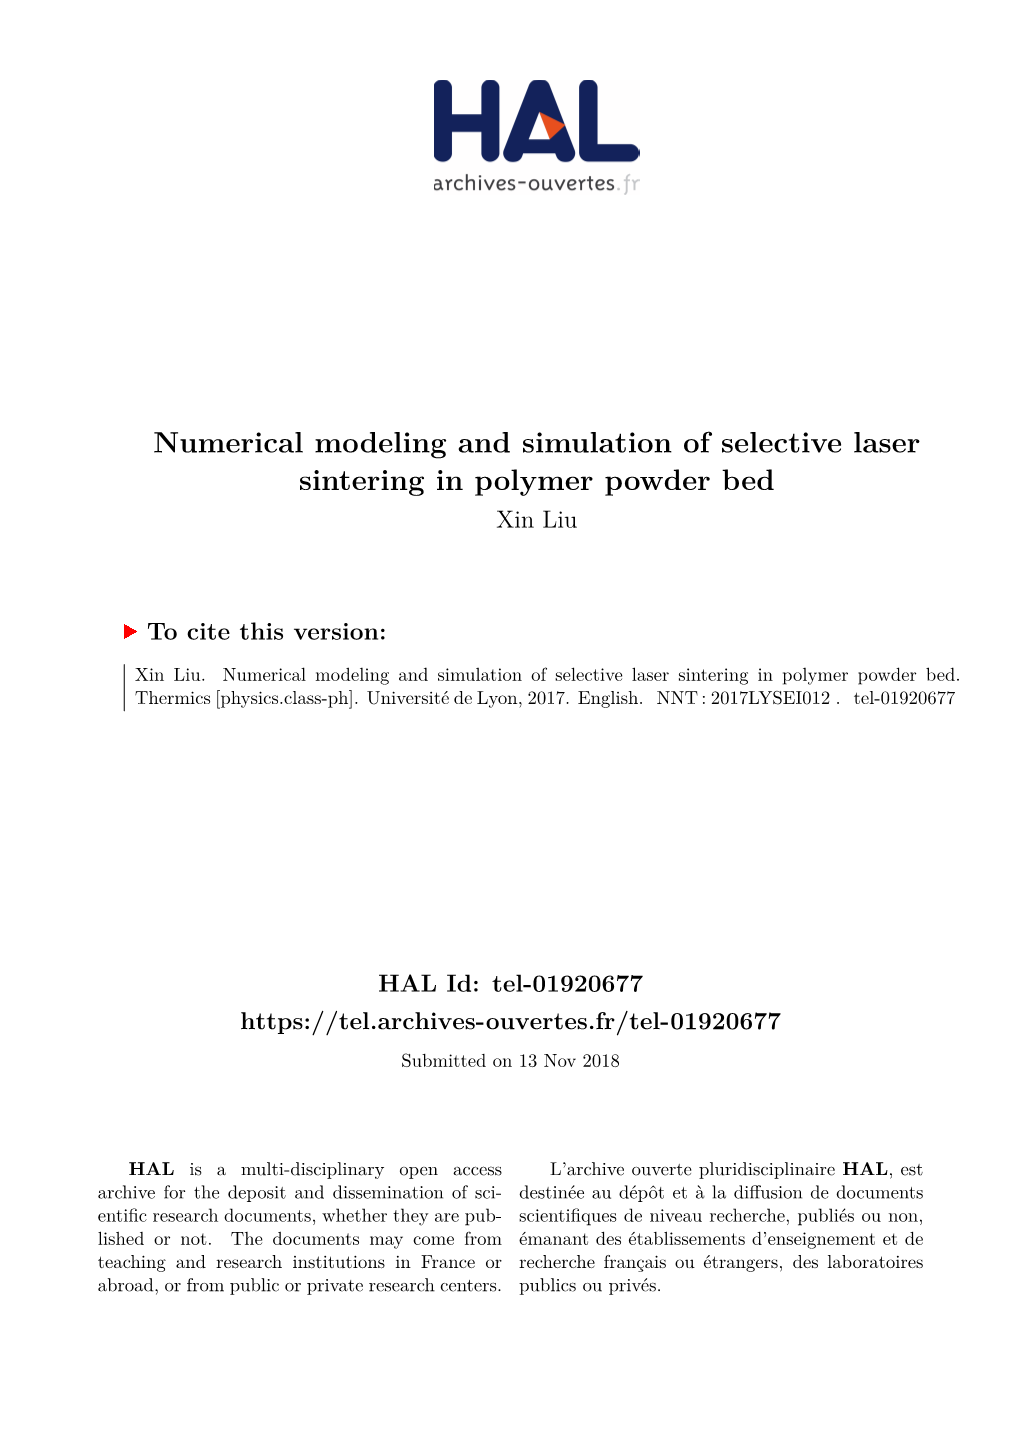 Numerical Modeling and Simulation of Selective Laser Sintering in Polymer Powder Bed Xin Liu